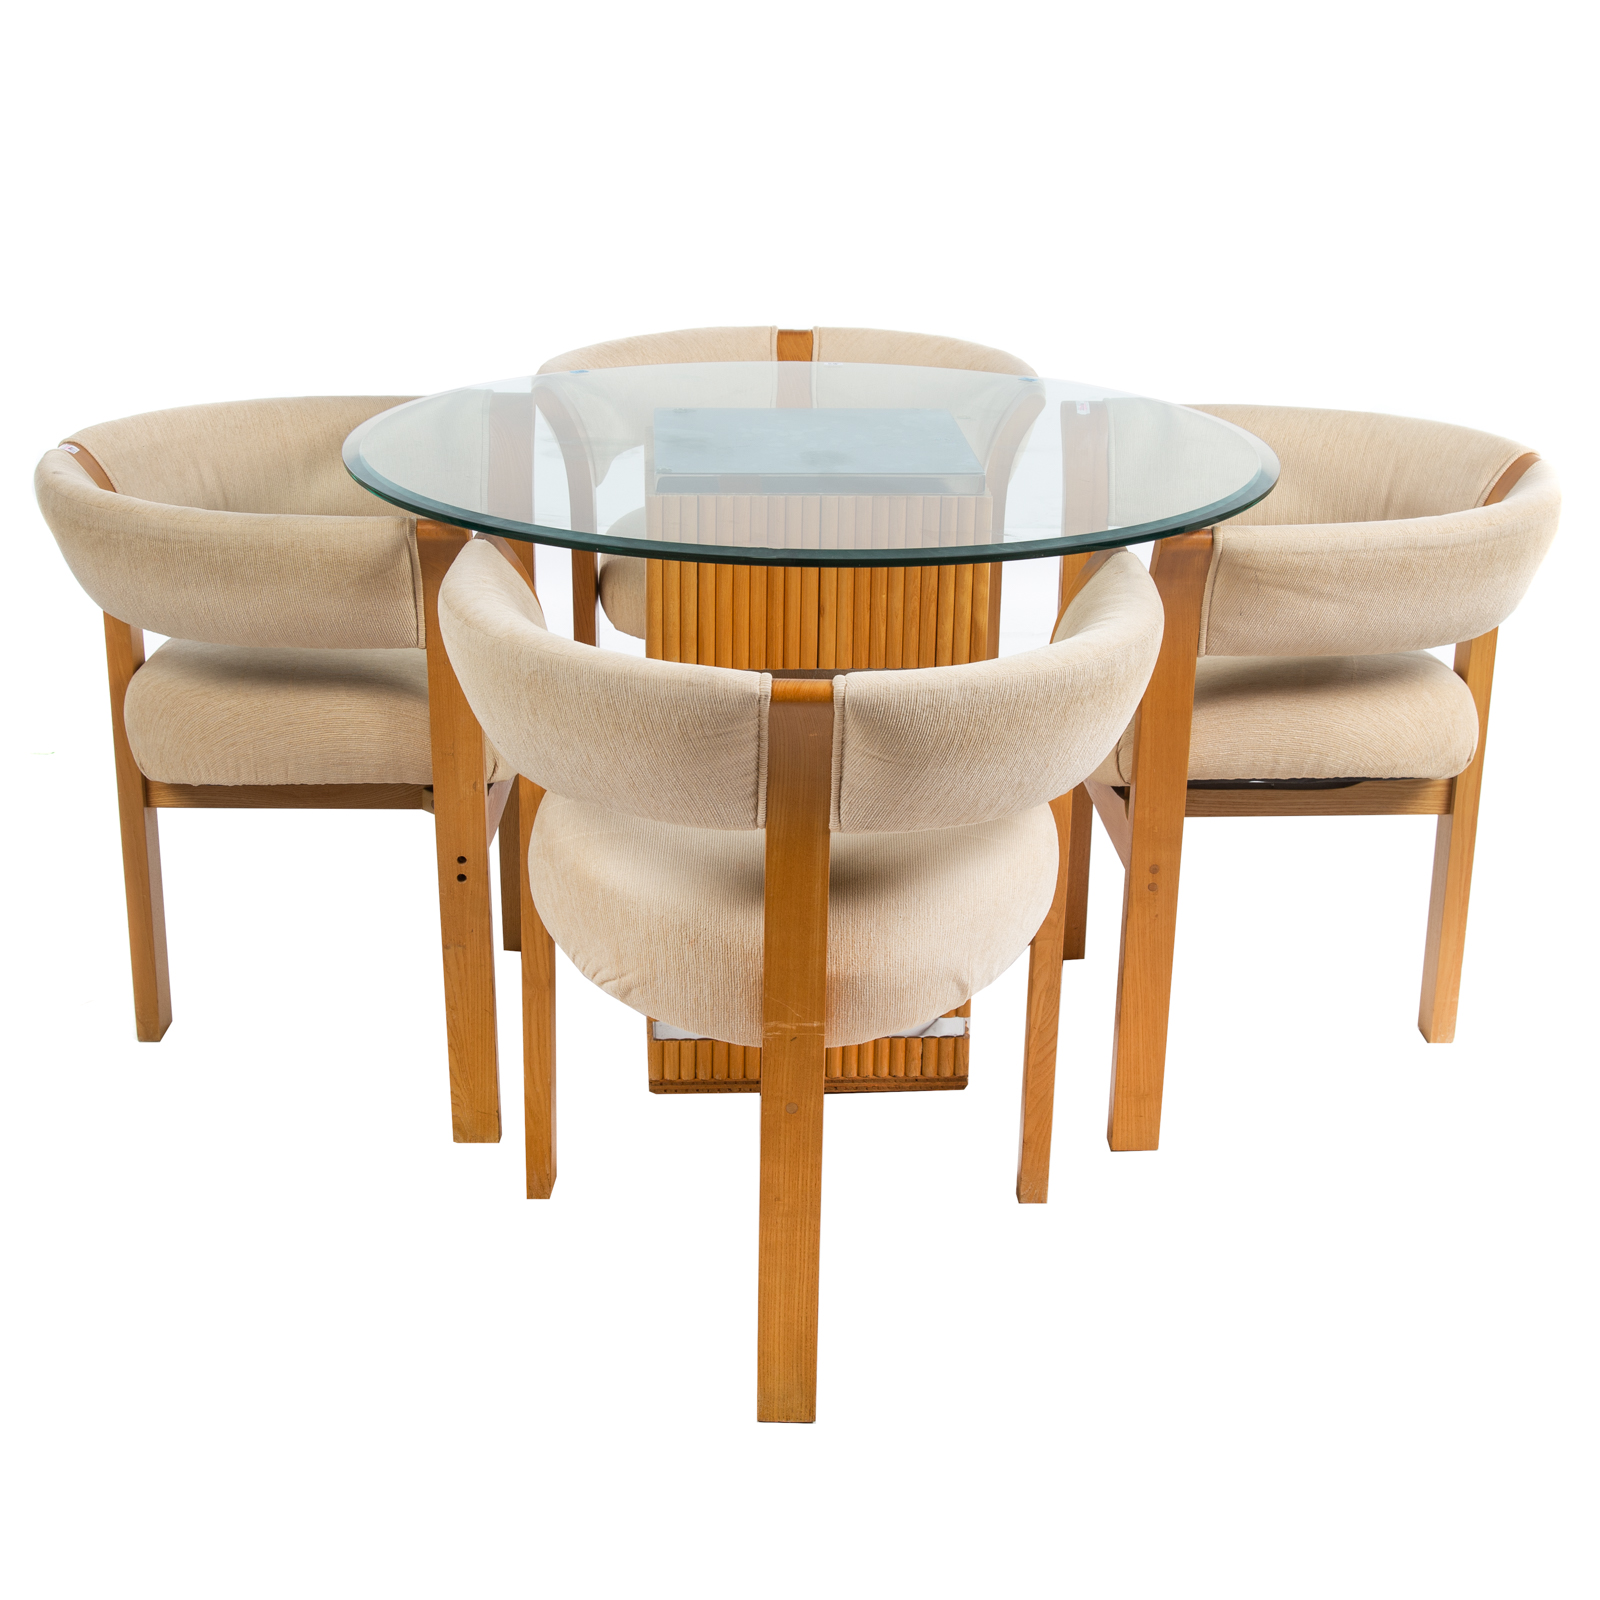 CONTEMPORARY ROUND GLASS TABLE 369467